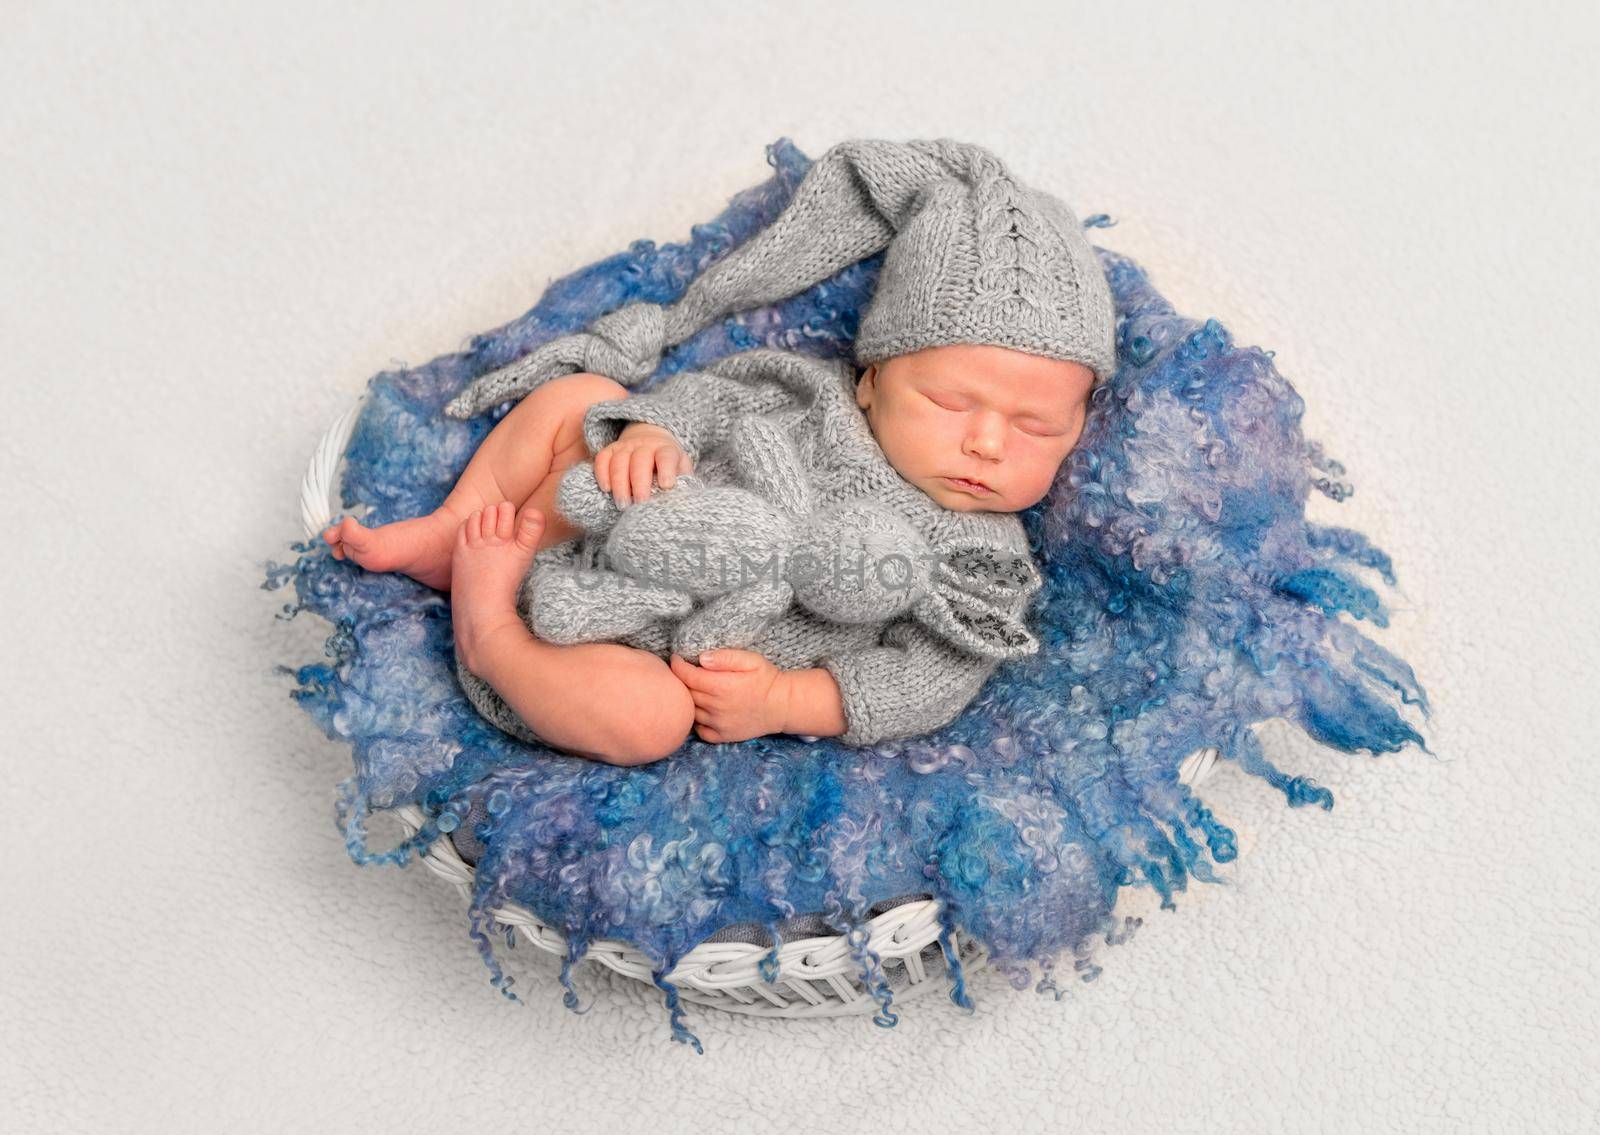 Infant in cute grey knitted outfit sleeping with his favorite toy on a fluffy pillow